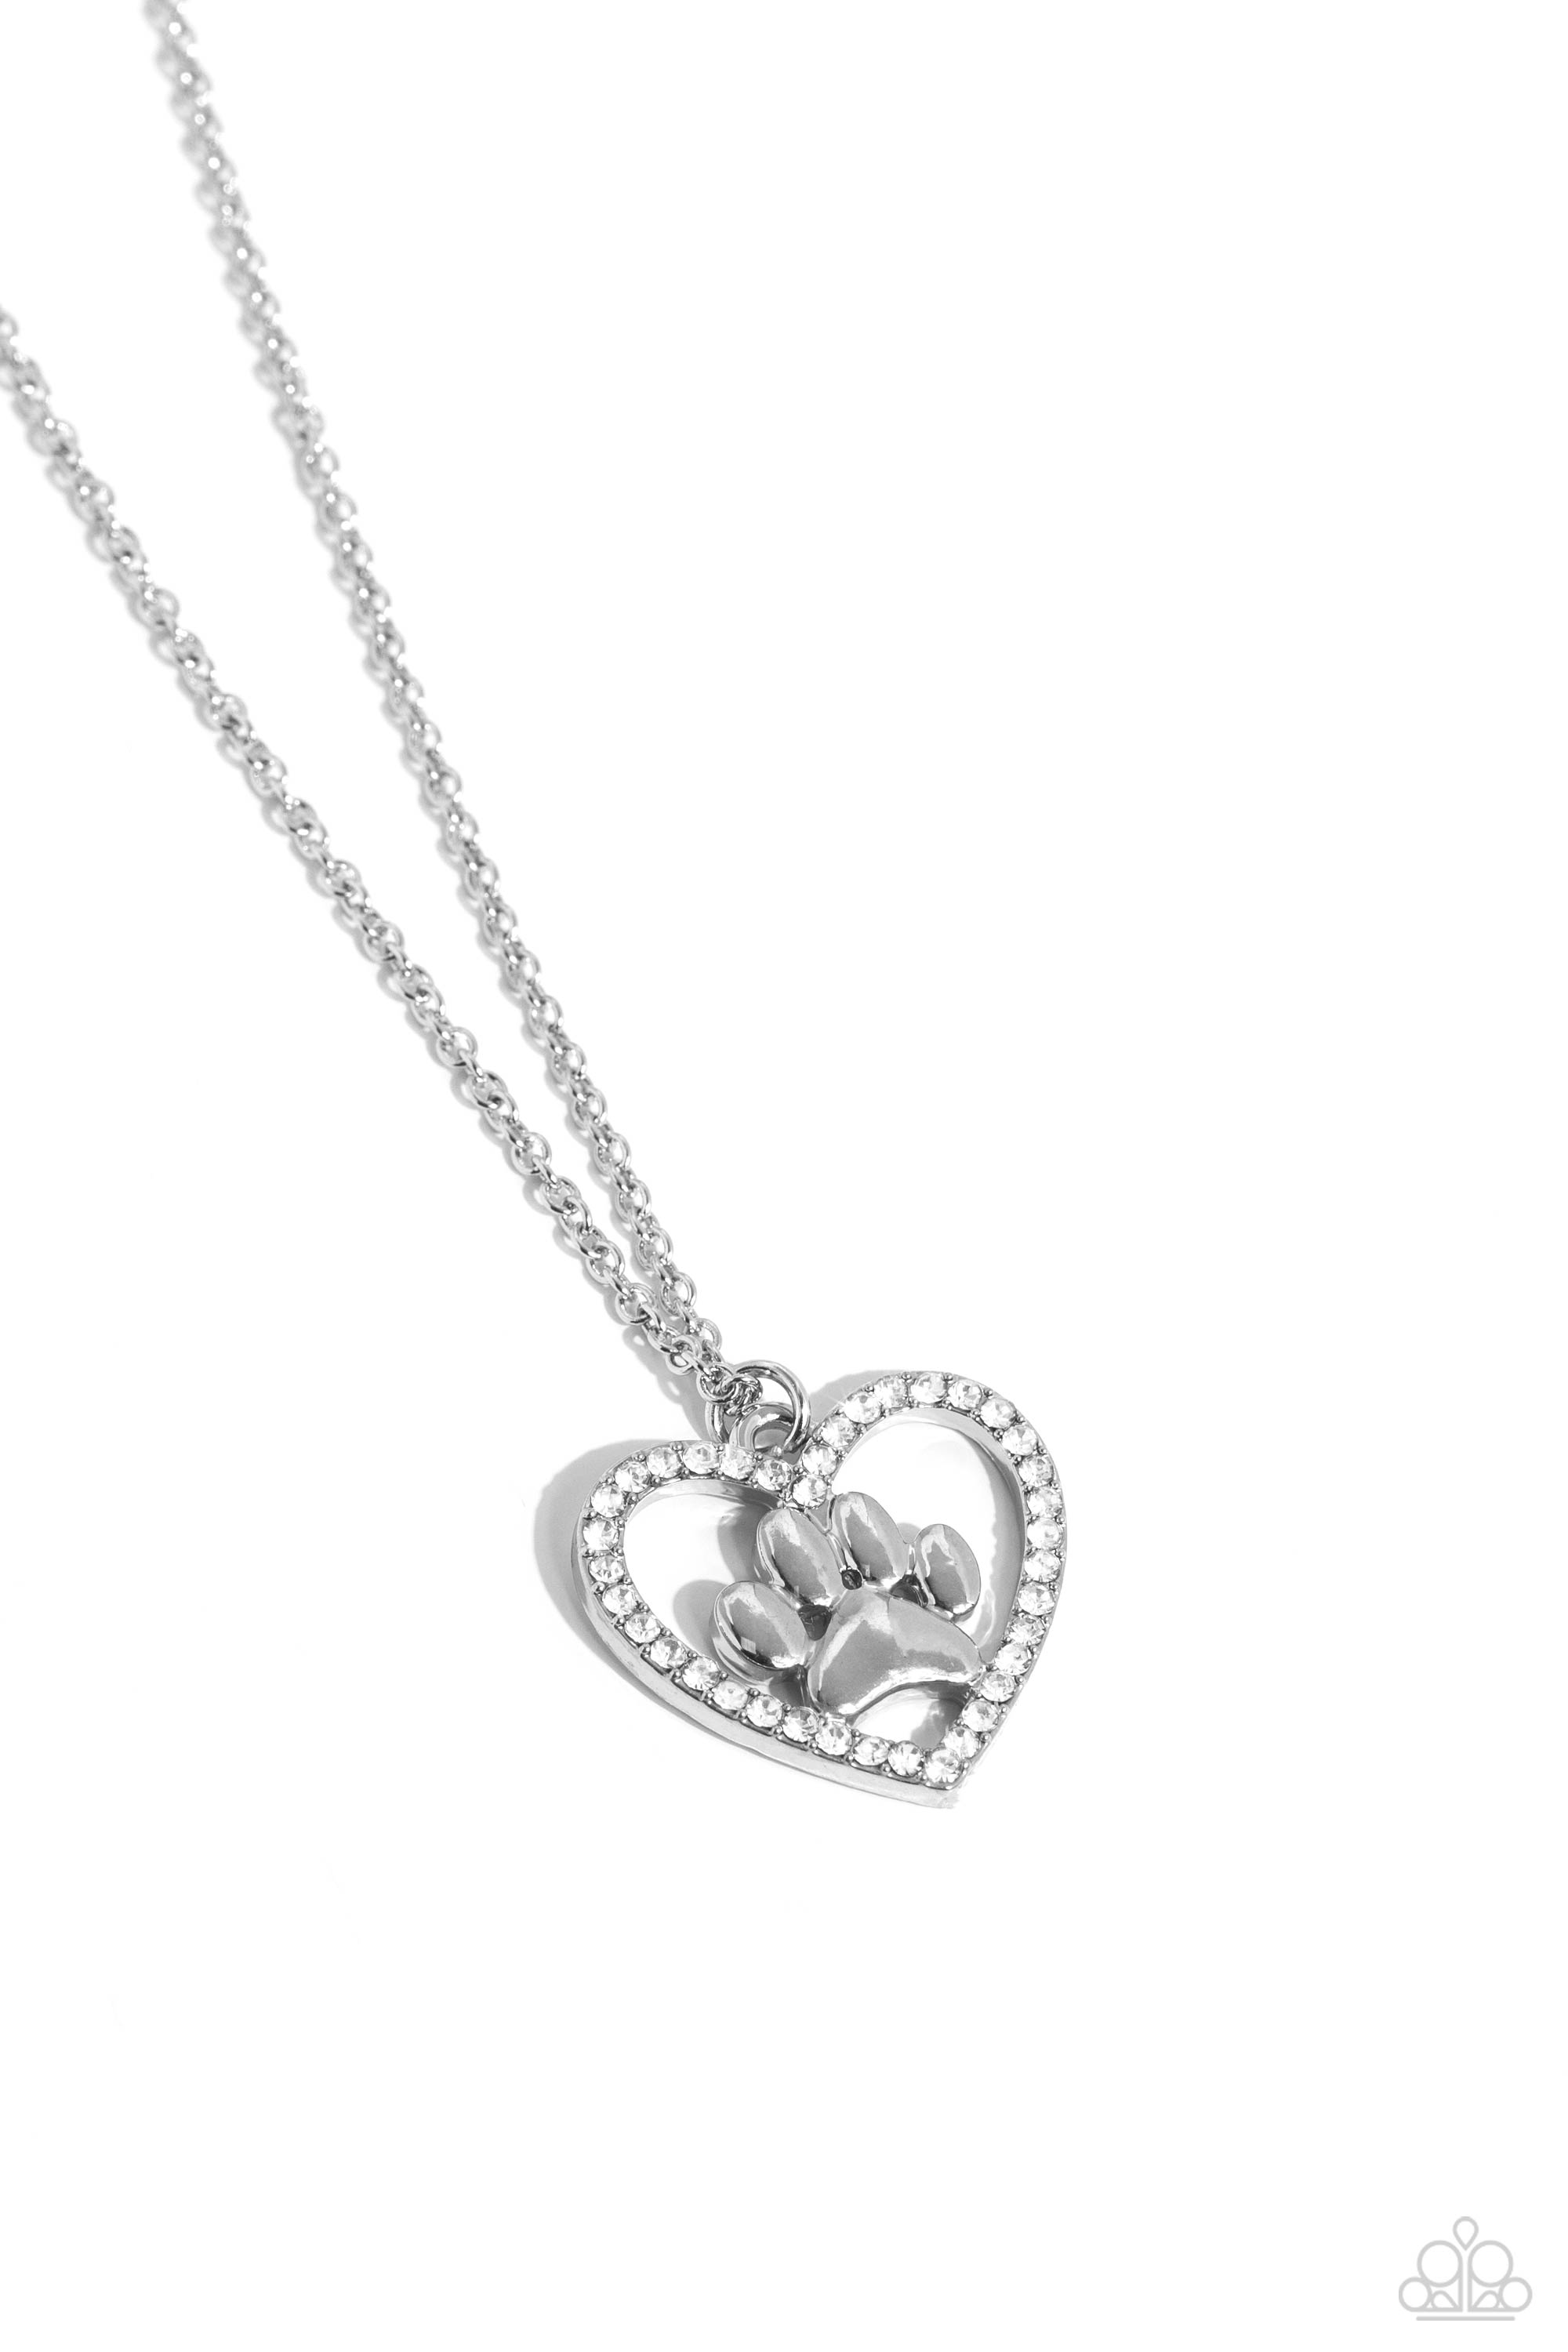 PET in Motion White Heart & Paw Print Necklace - Paparazzi Accessories- lightbox - CarasShop.com - $5 Jewelry by Cara Jewels